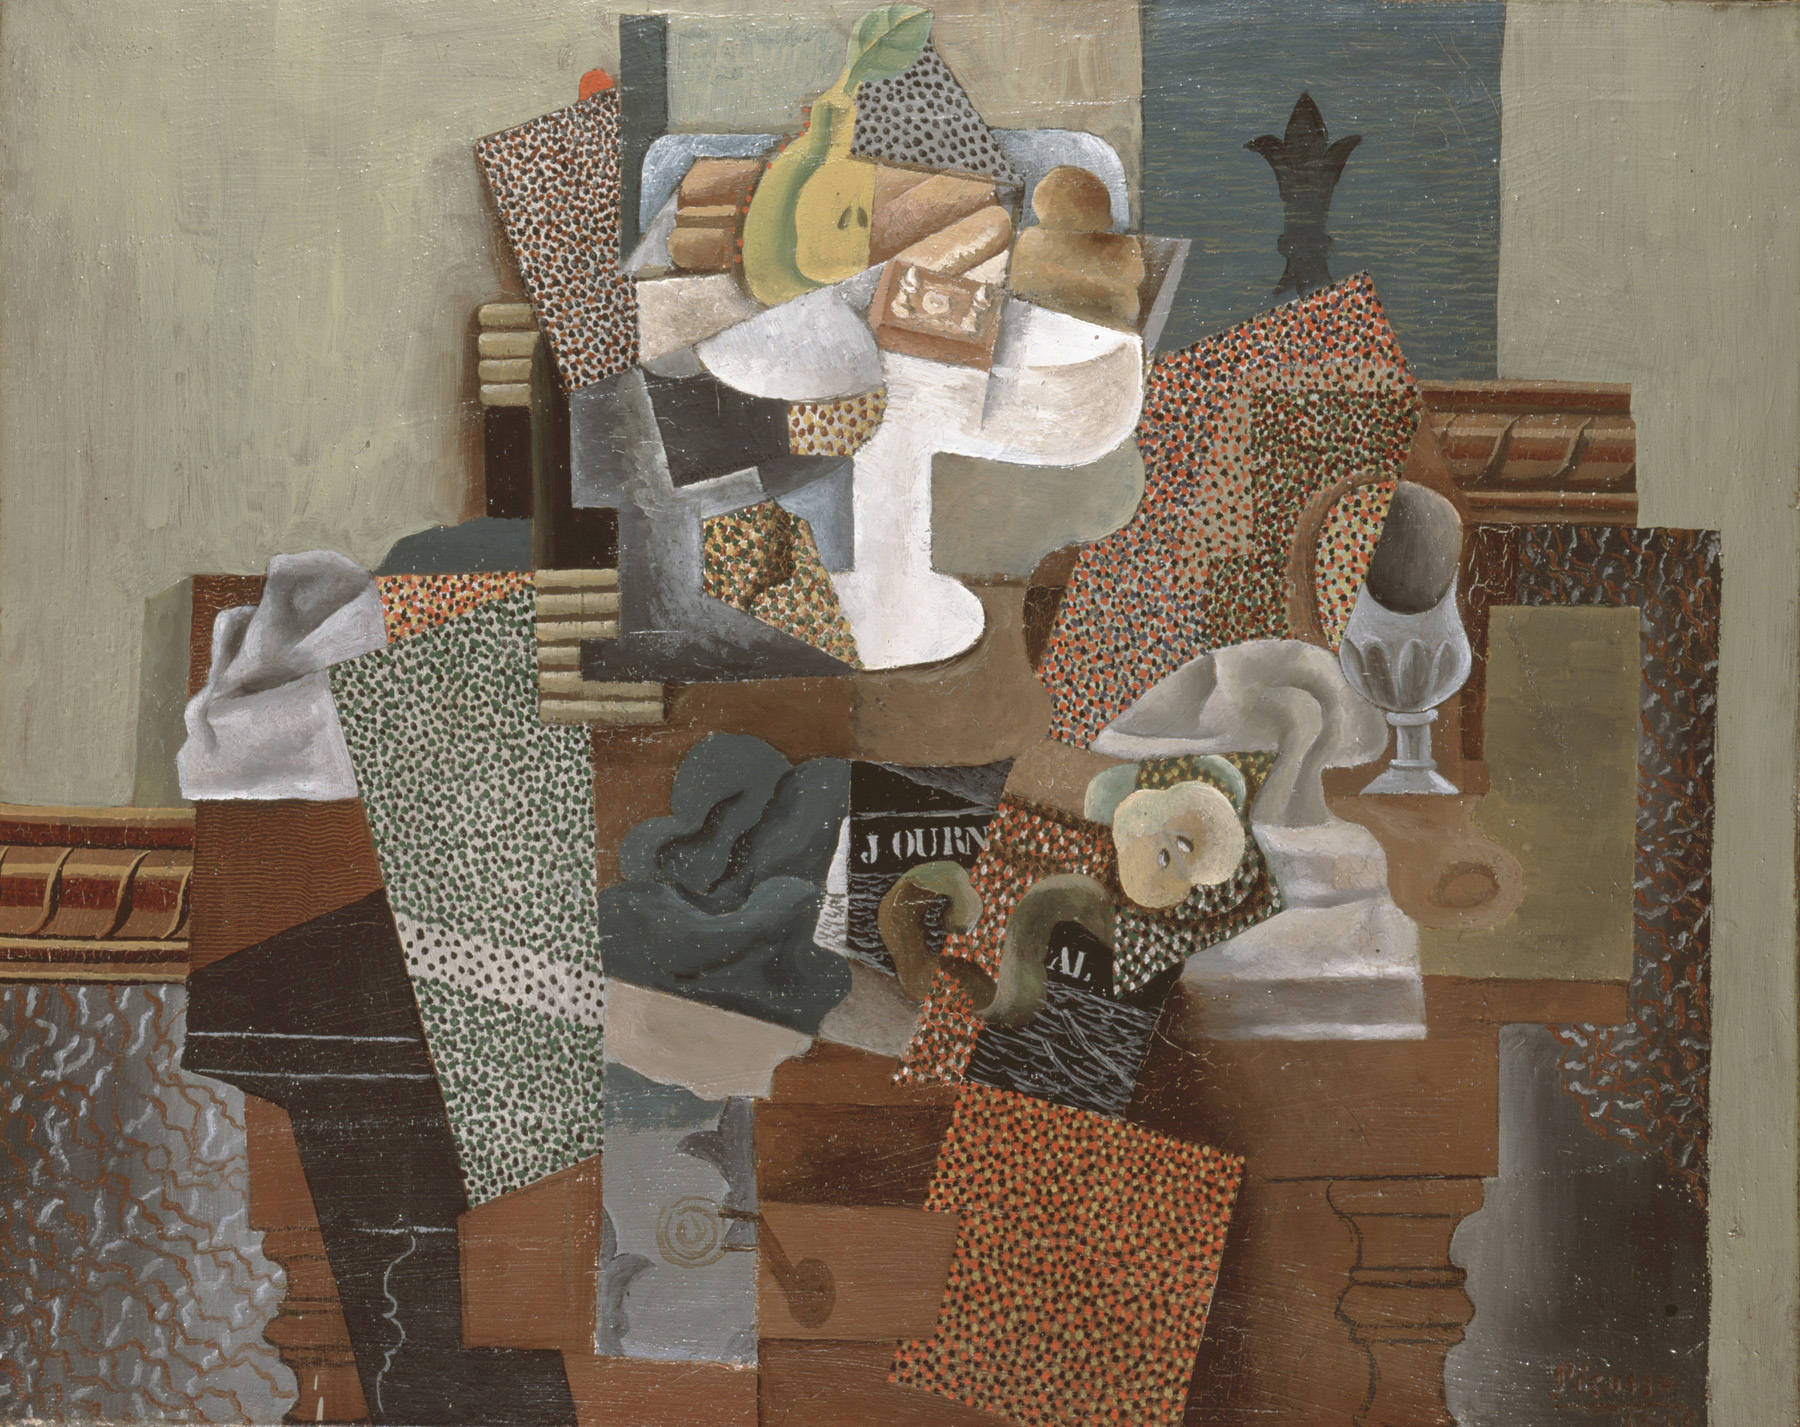 Pablo Picasso, Nature morte au compotier (Still Life with a Compote and Glass), oil on canvas (1914-1915)